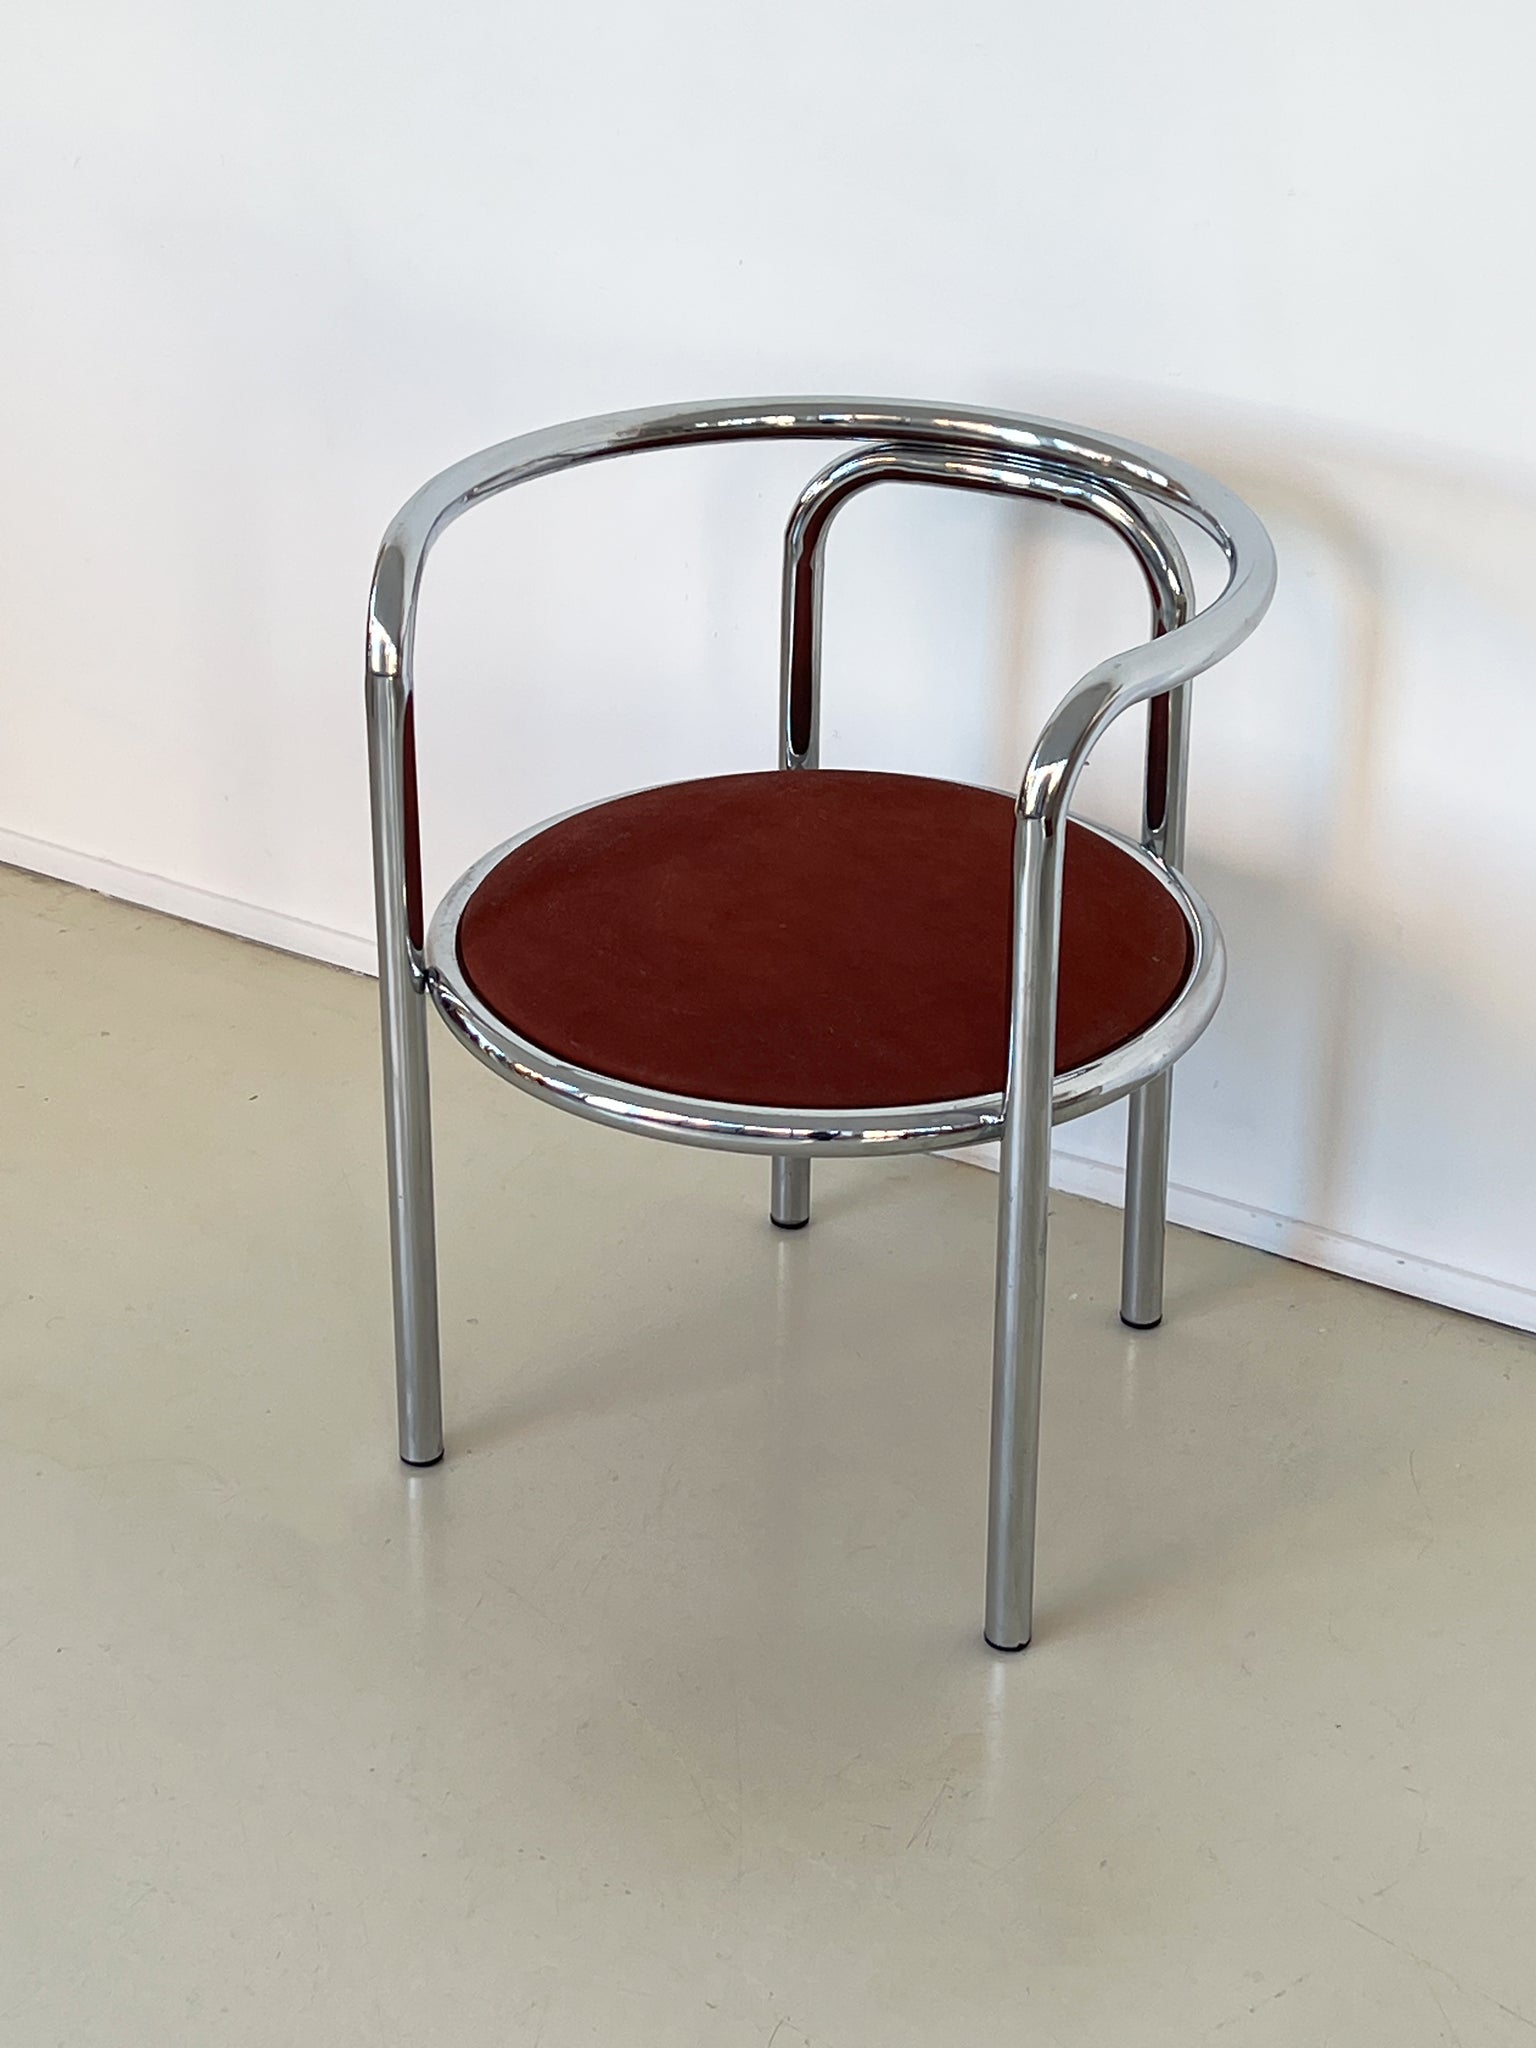 1960s "Locus Solus" Chair by Gae Aulenti for Poltronova, Itlay